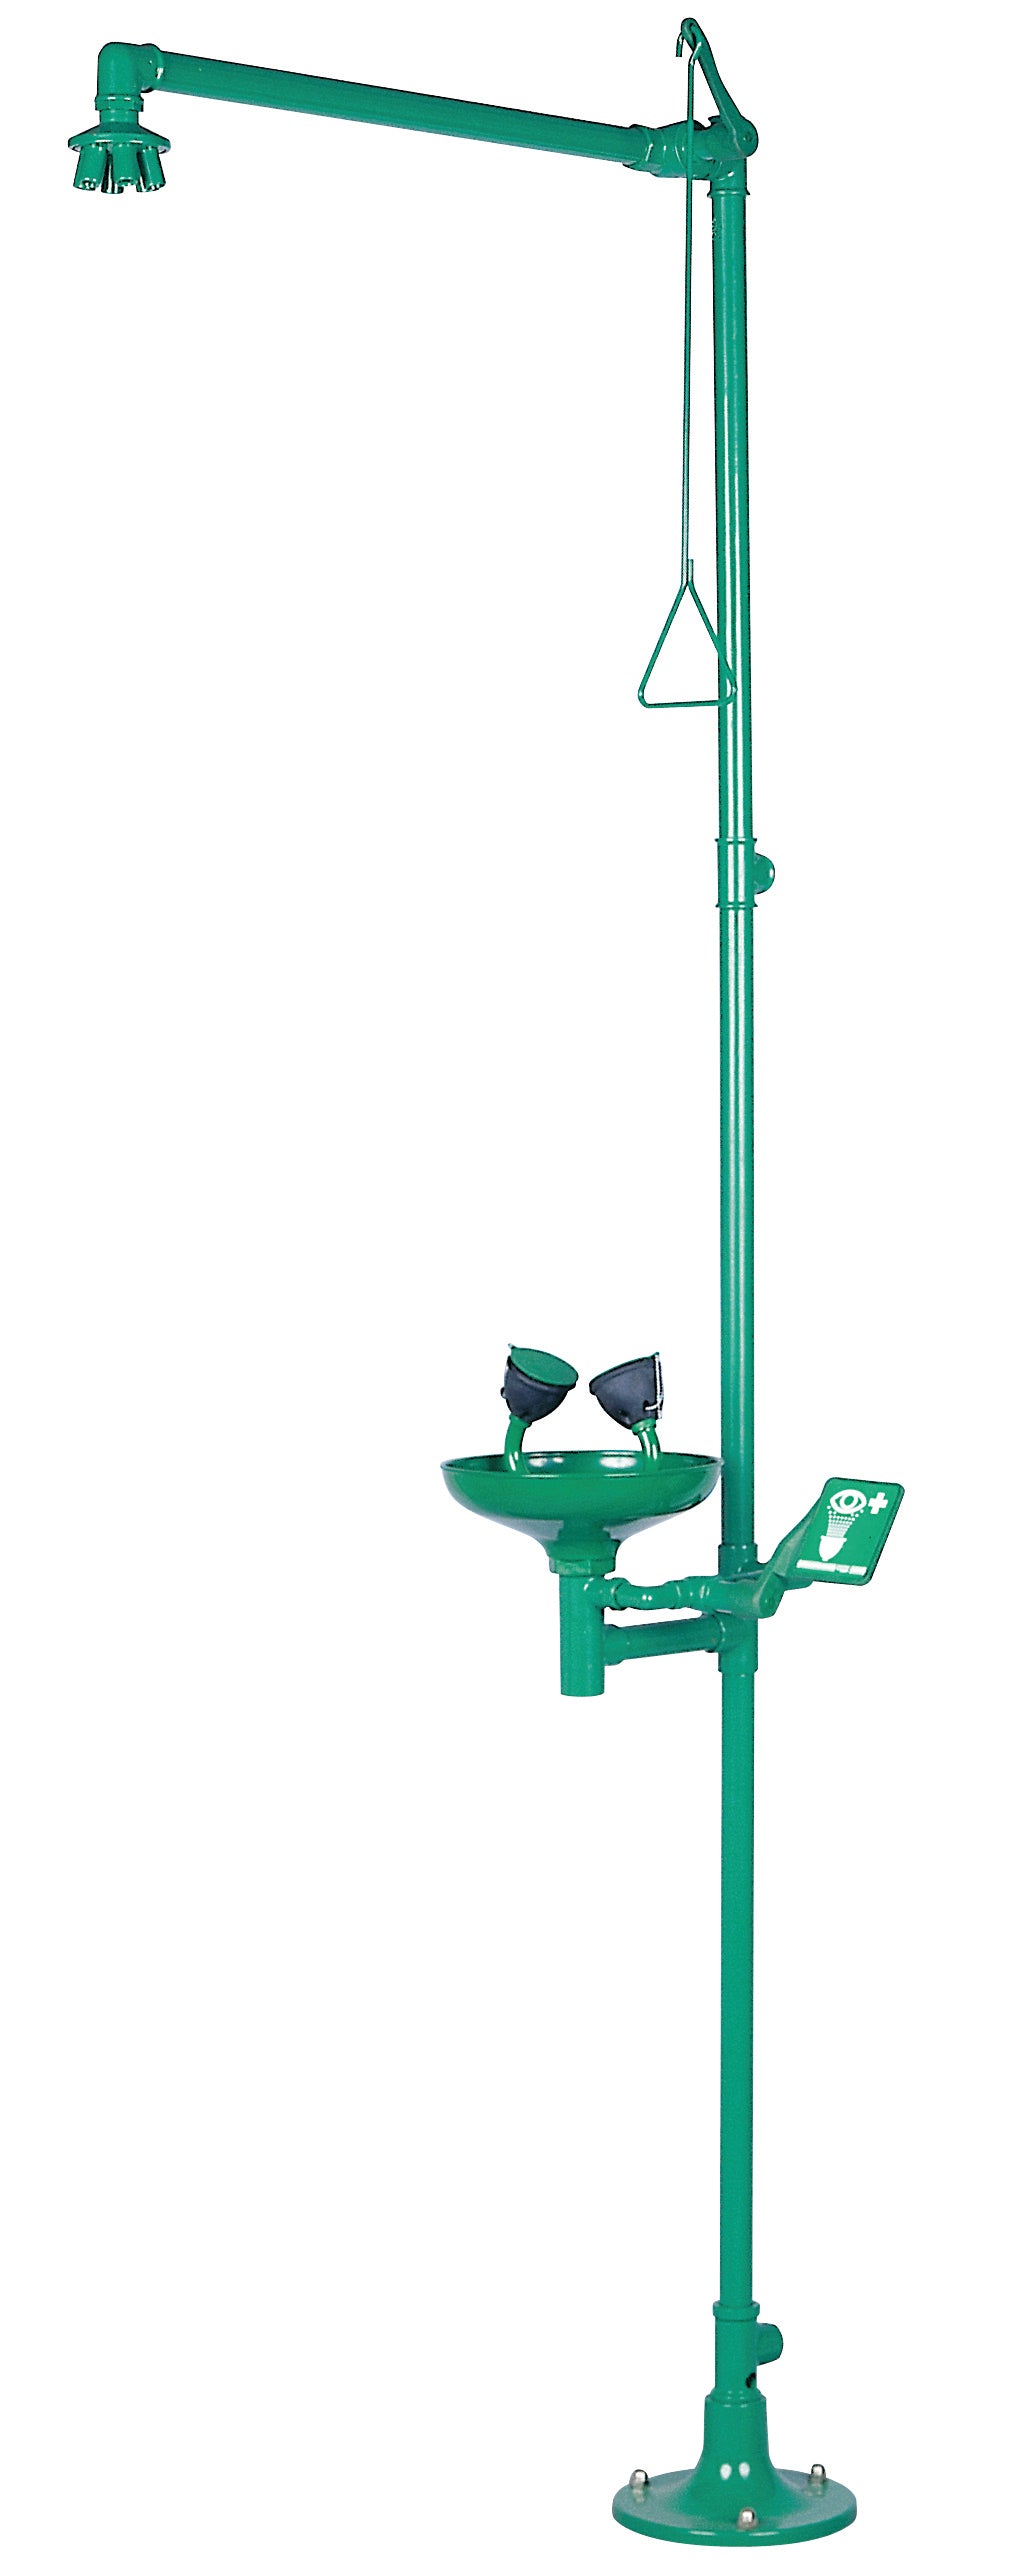 Body shower steel green, free standing, steel powder-coated smooth